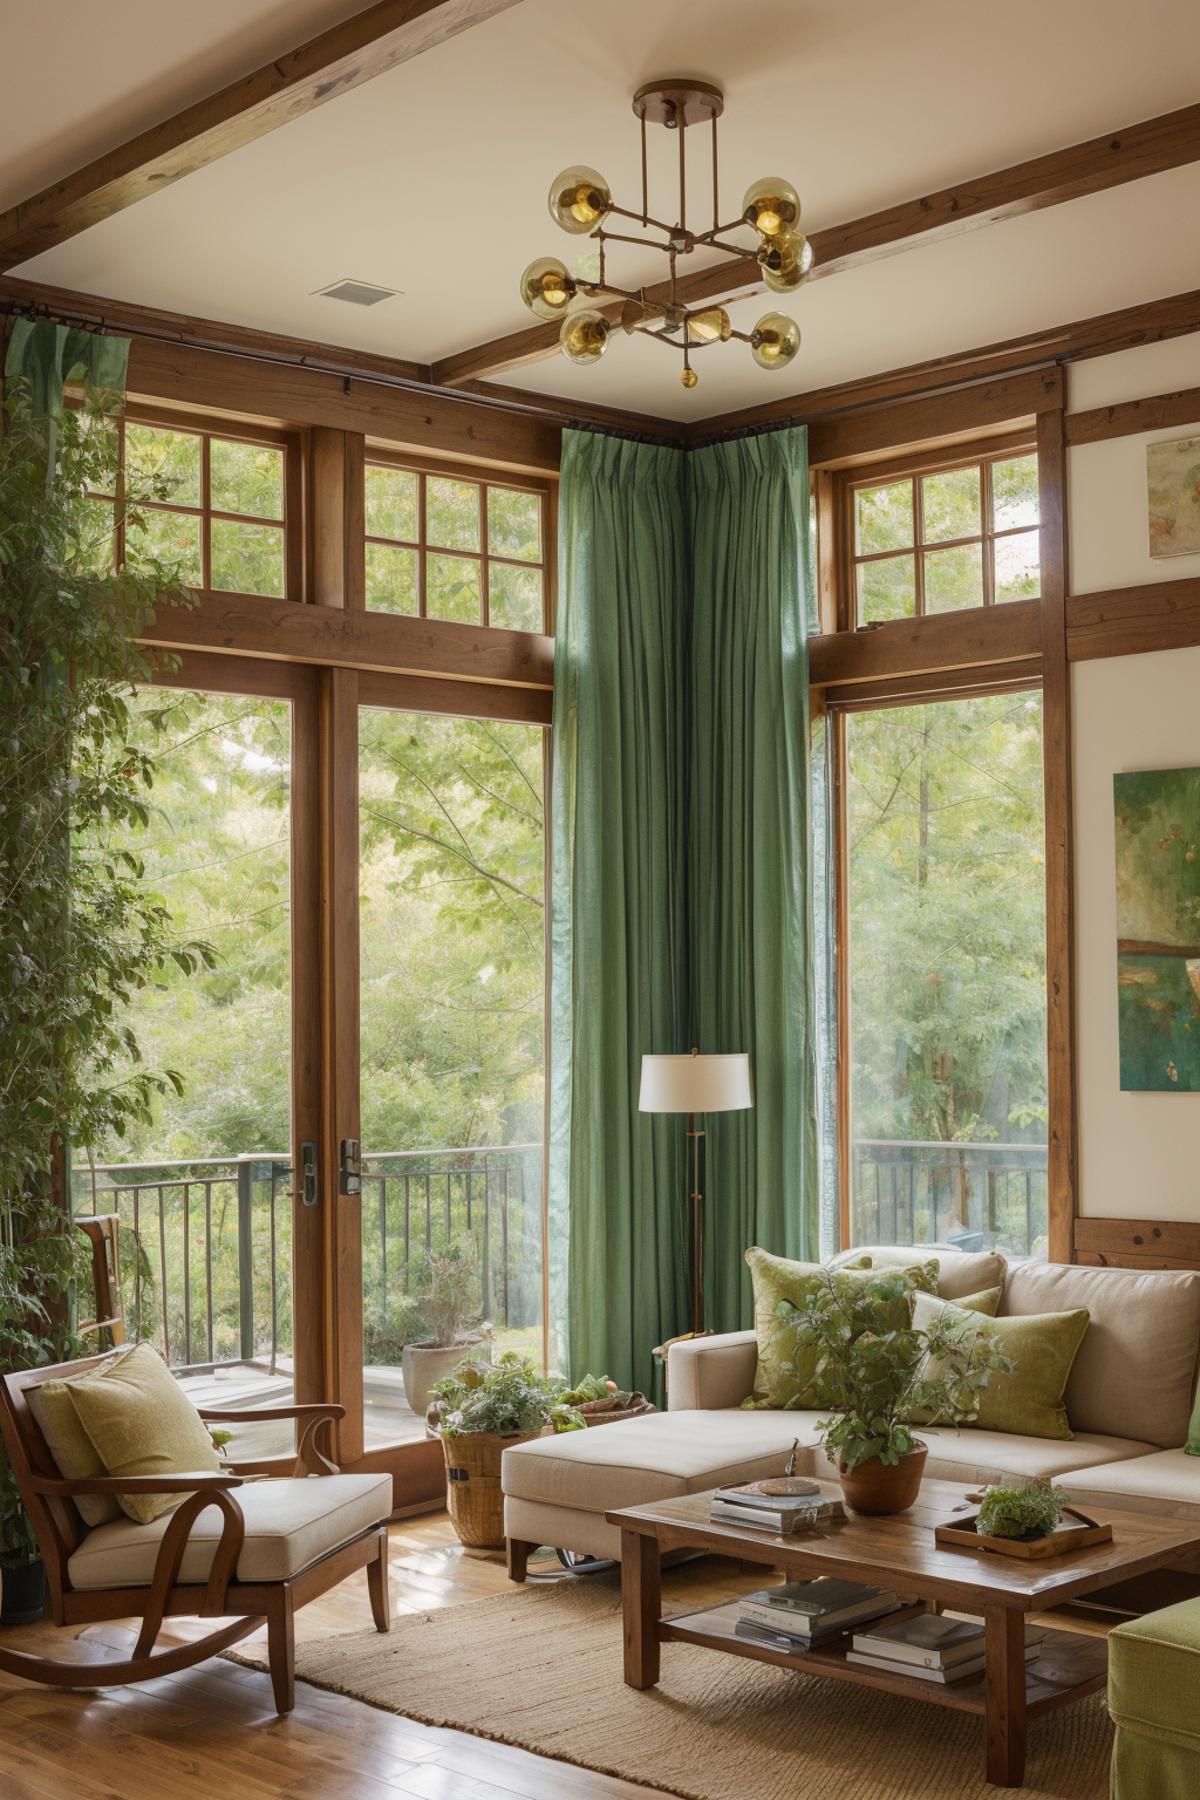 A cozy living room with a green curtain, a couch, a lamp, and potted plants.